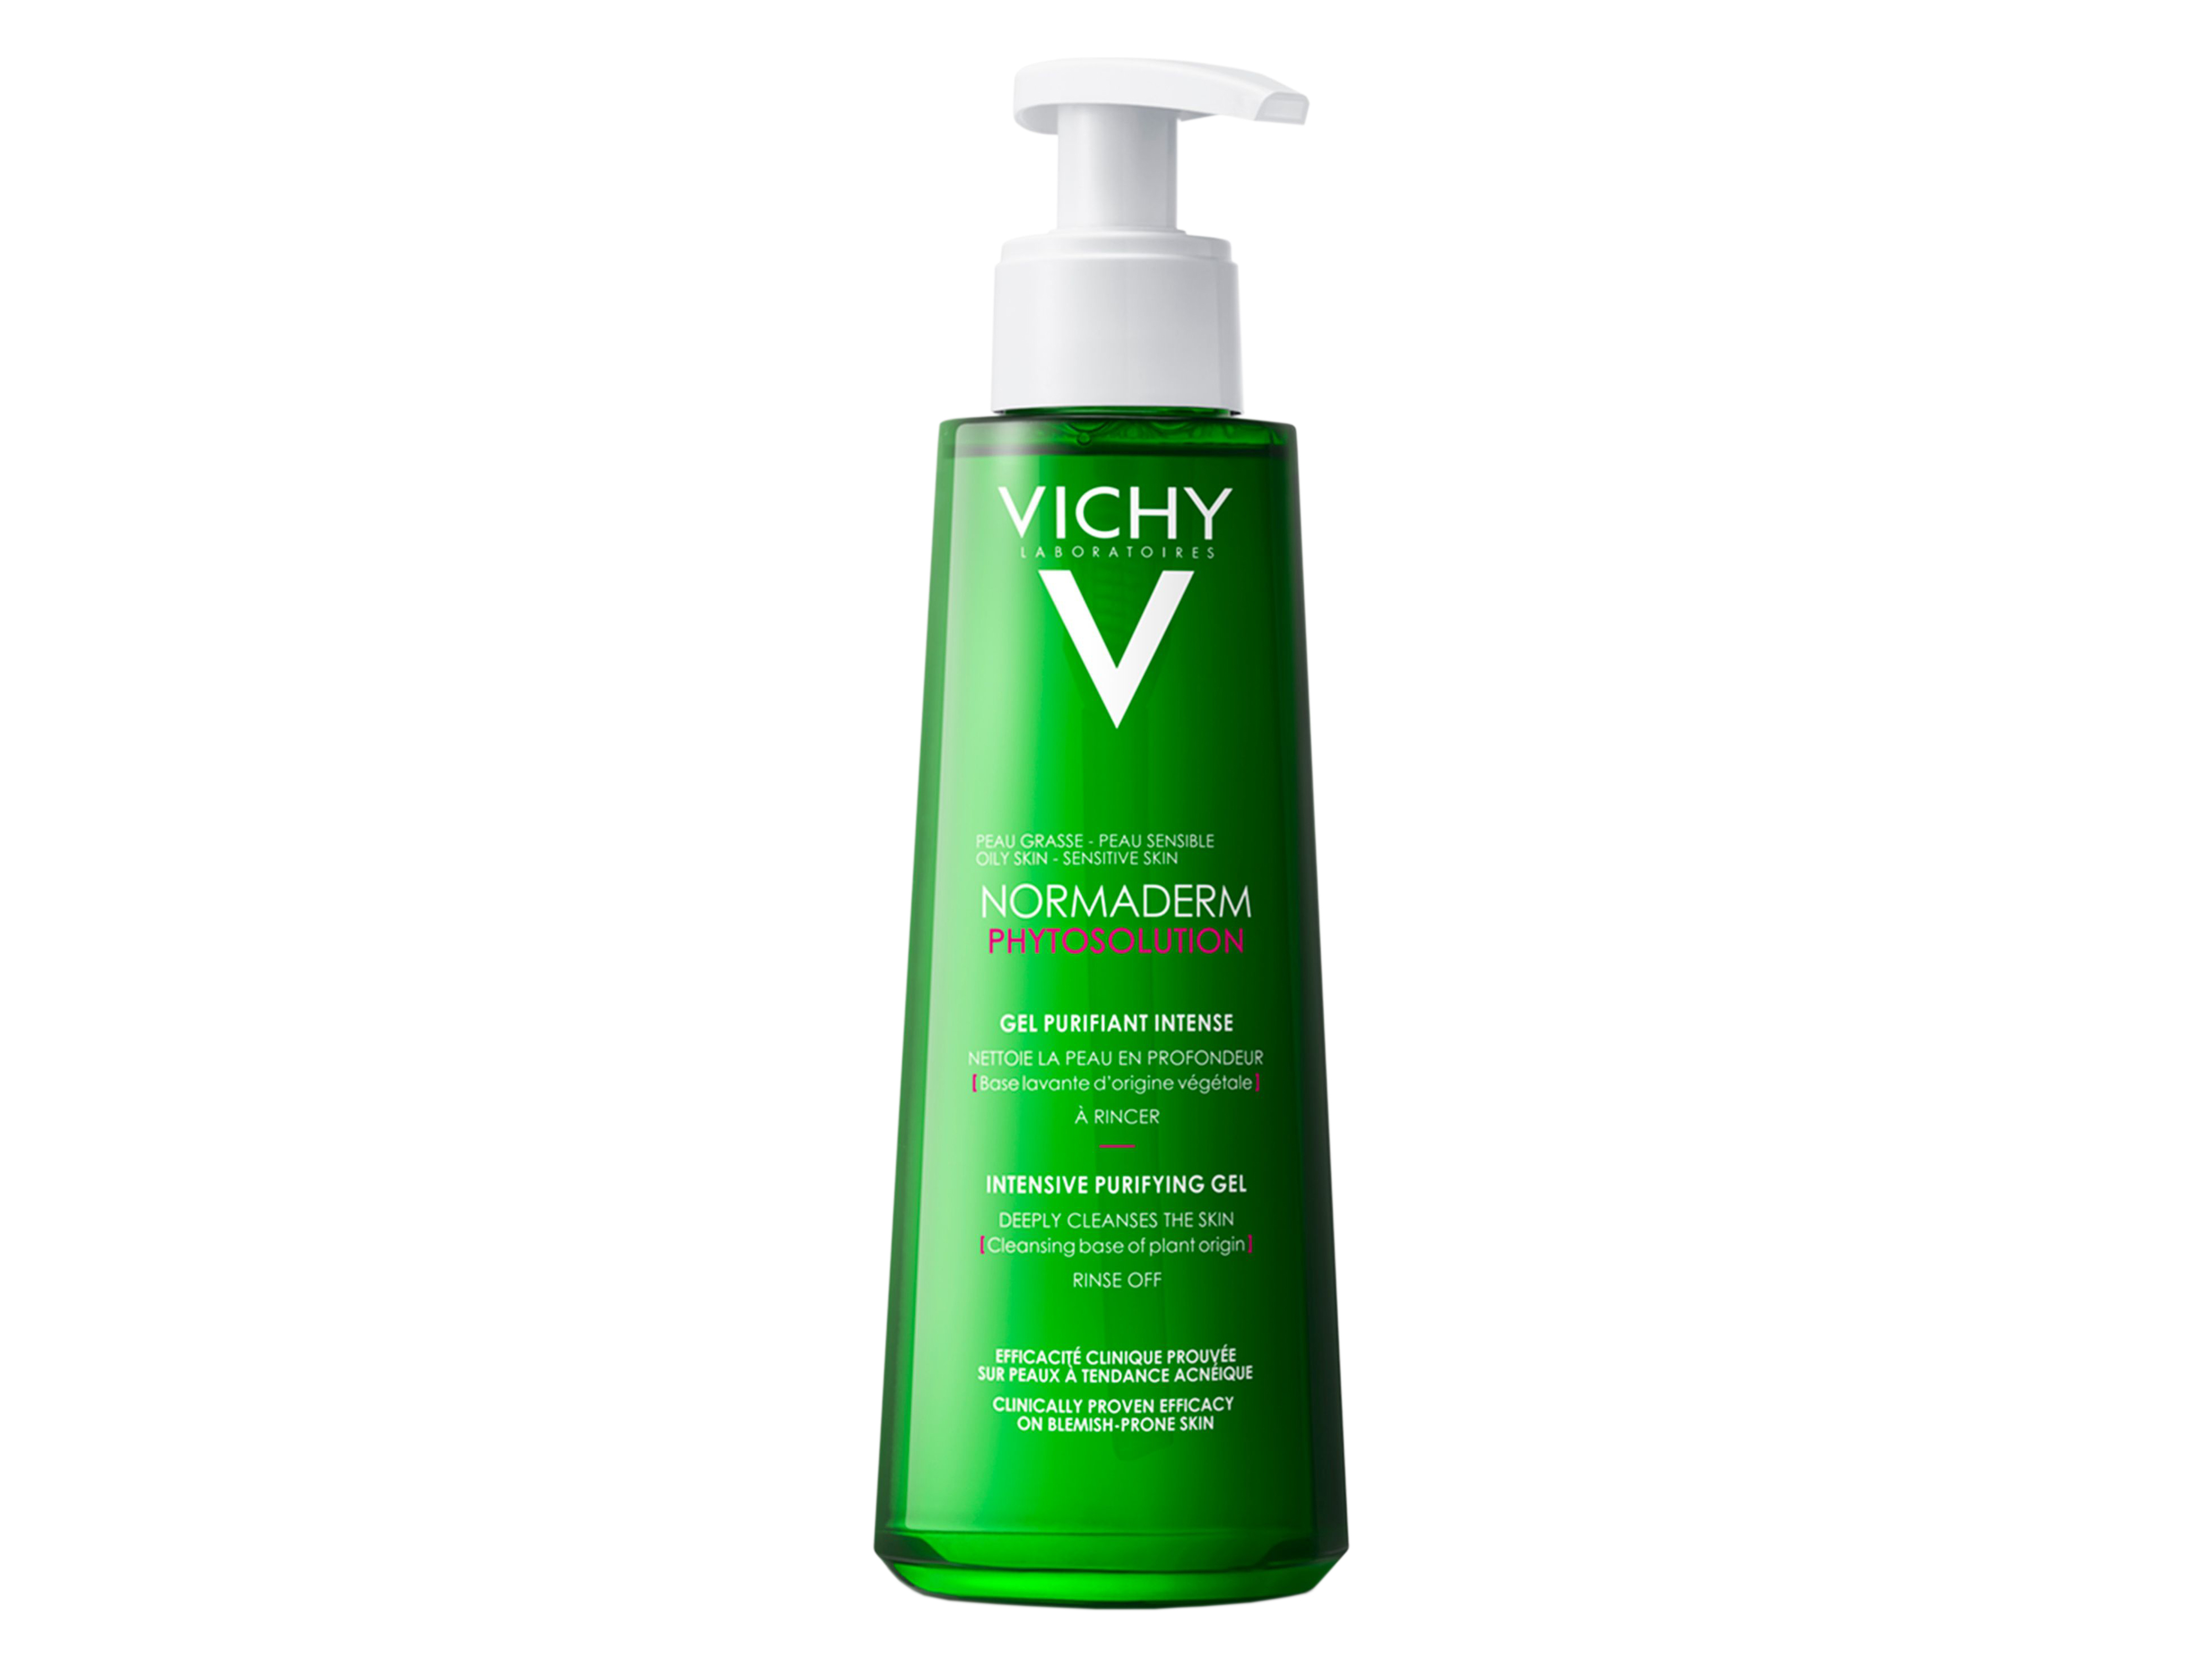 Vichy Normaderm Phytosolution Intensive Purifying Gel, 200 ml